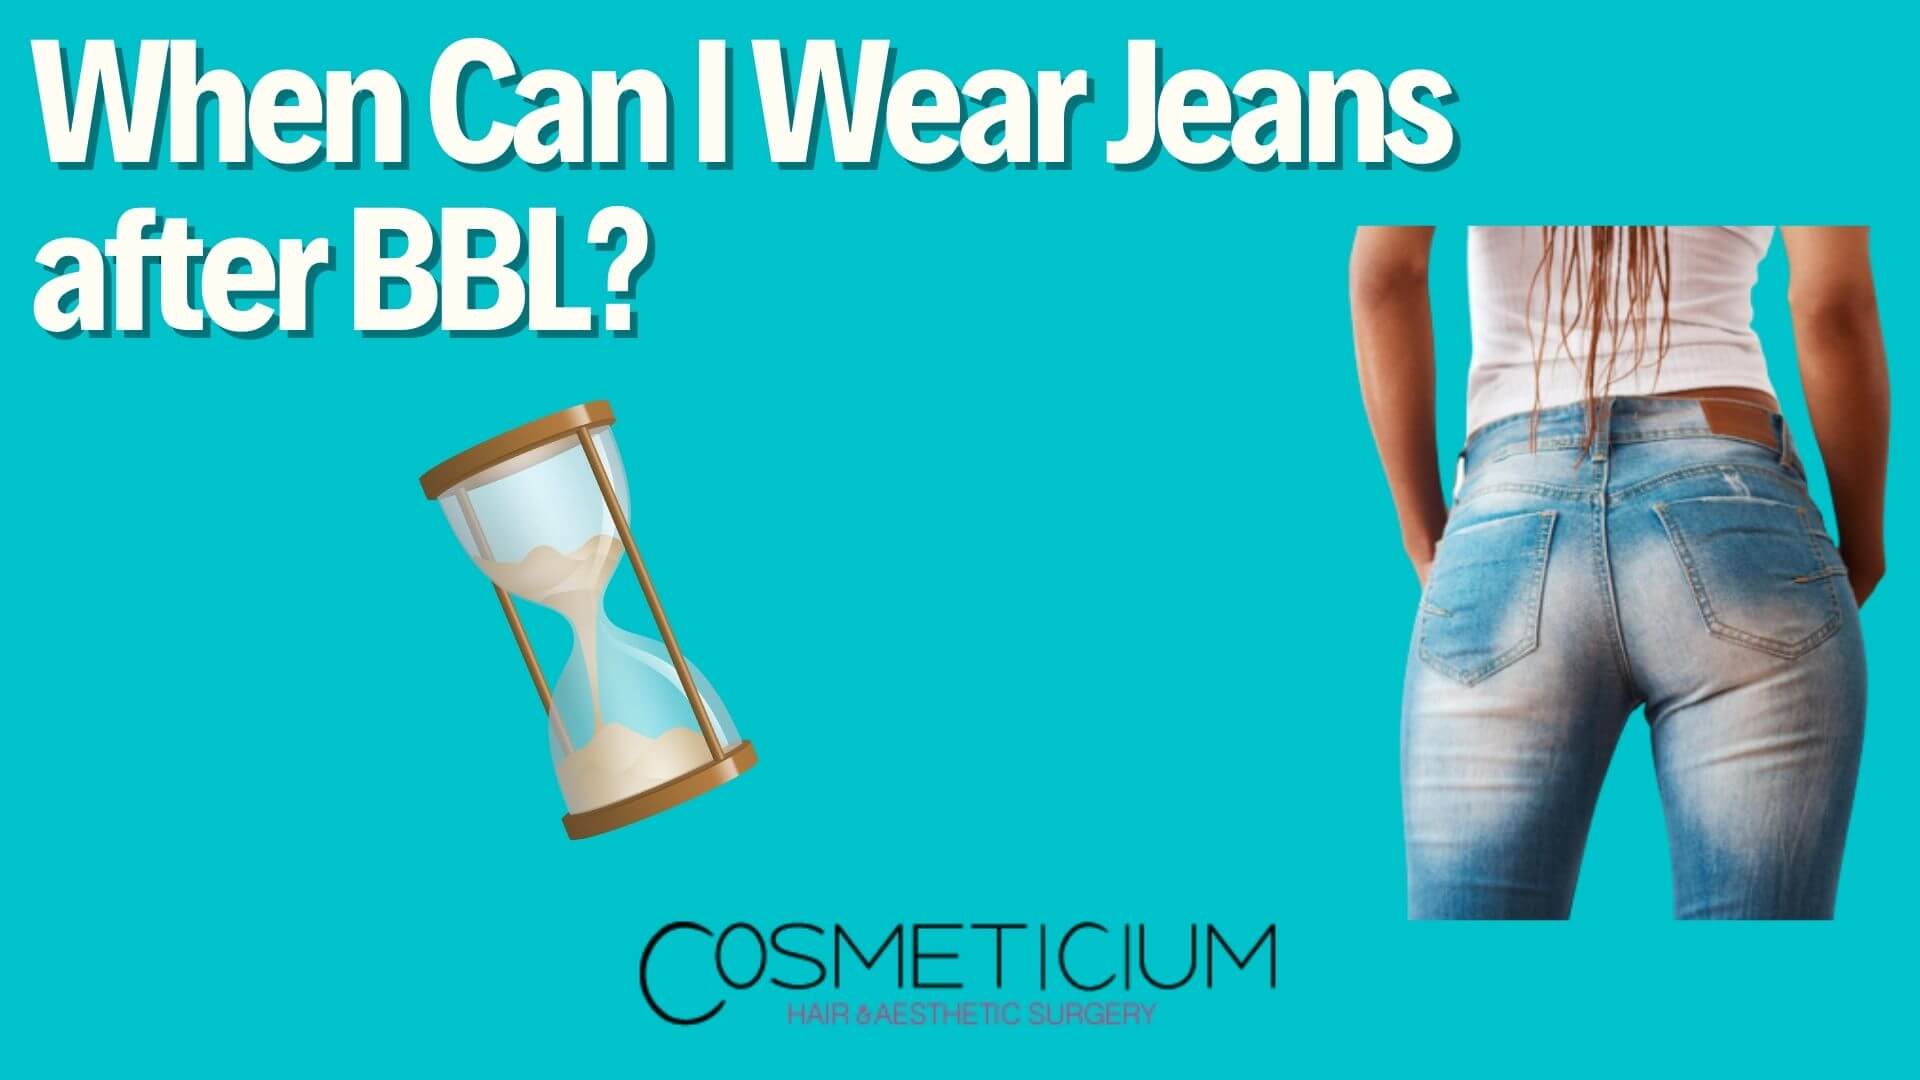 When Can I Wear Jeans after BBL? Here’s What Experts Say!